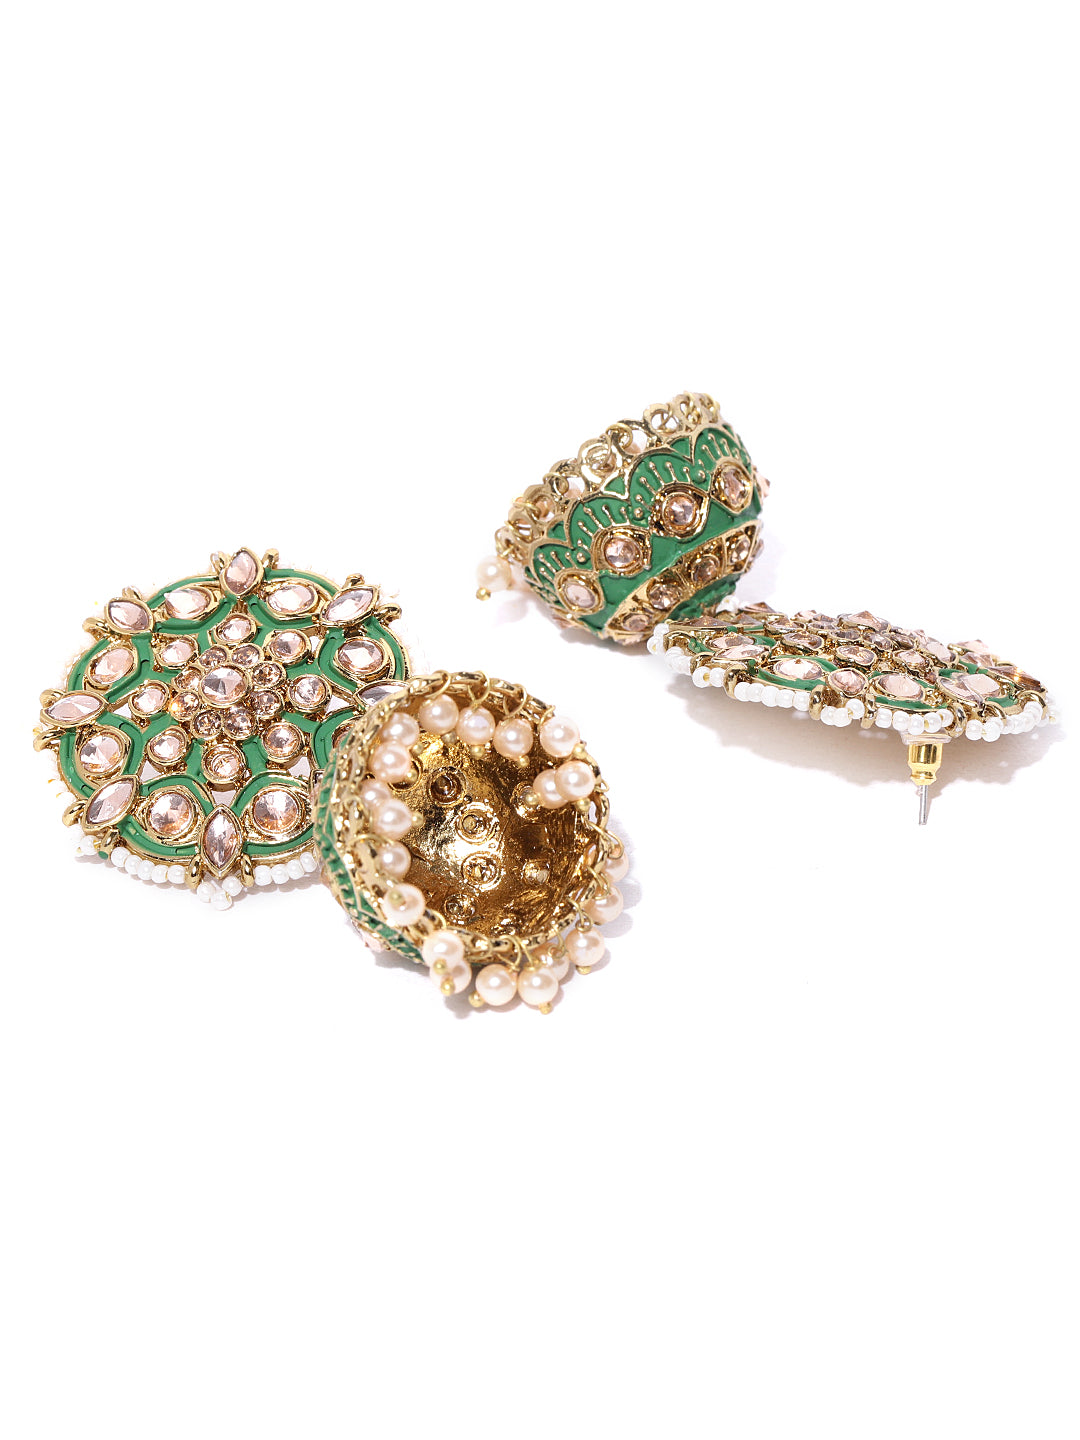 Gold-Plated Stones Studded Meenakari Jhumka Earrings in Green color with Pearls Drop